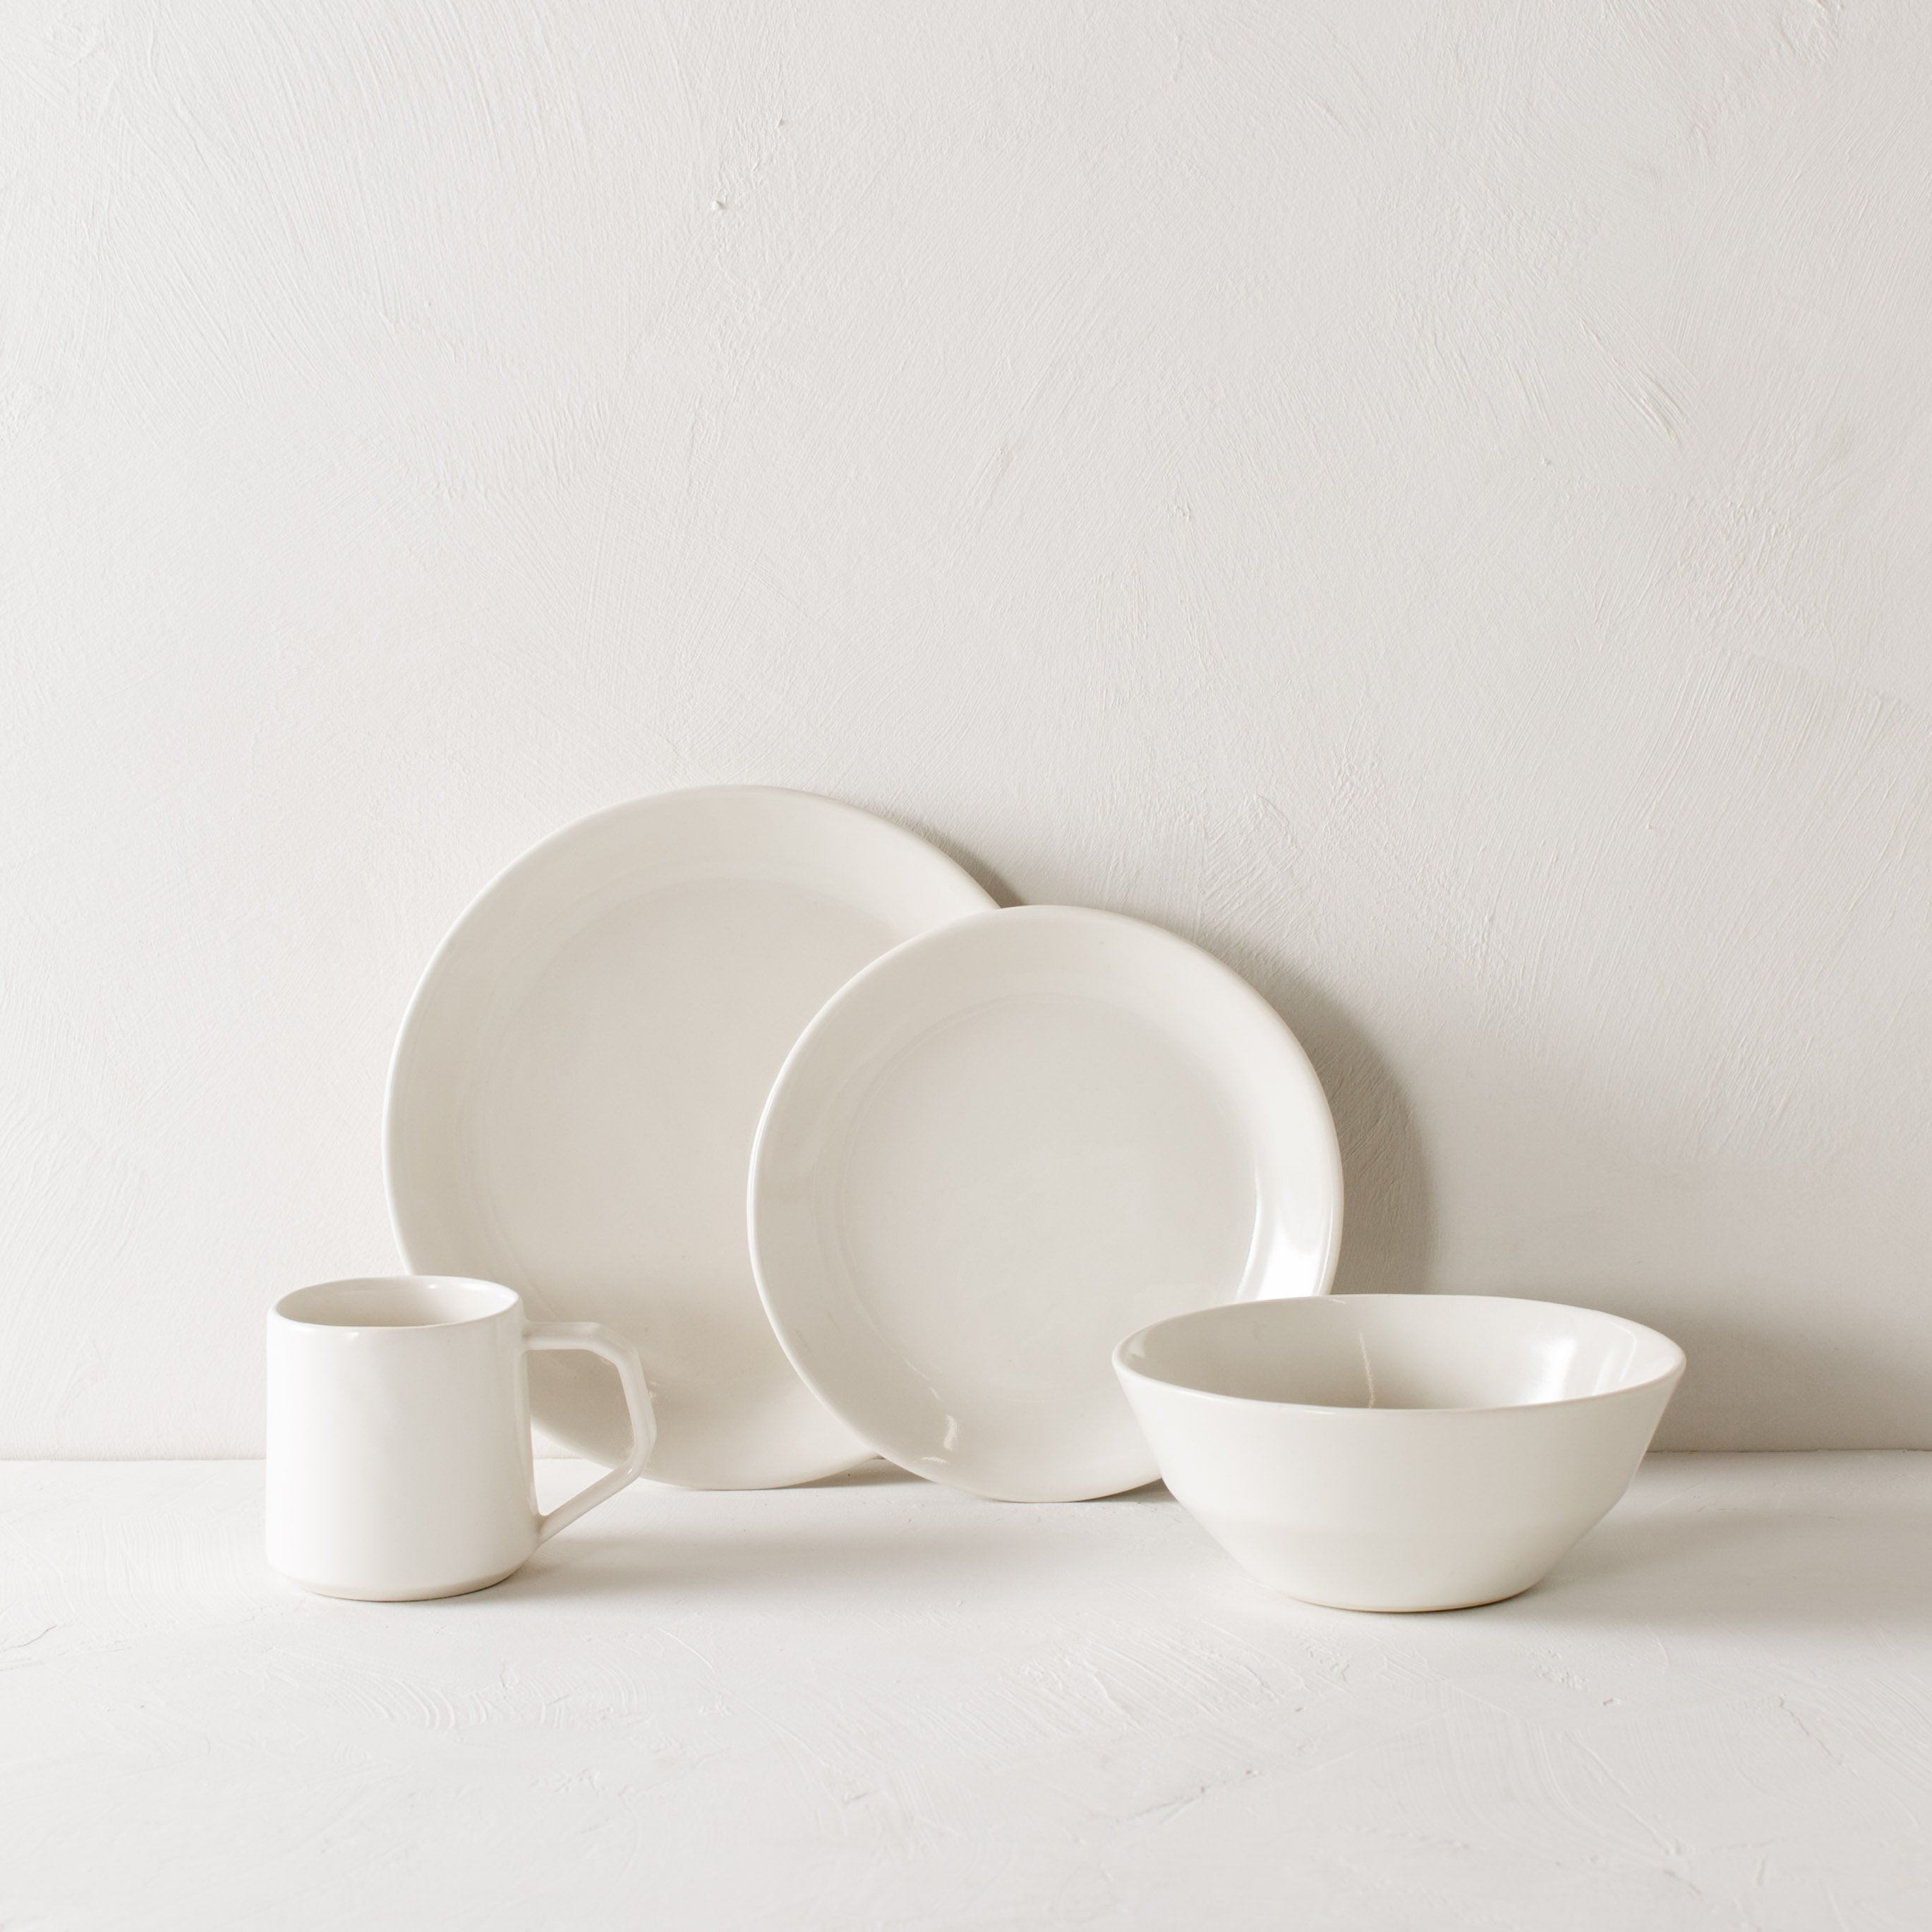 White minimal ceramic dinner set. Large and small plate leaning against white plaster wall. White ceramic mug and minimal bowl on each side. Handmade ceramics designed and sold by Convivial Production, Kansas City Ceramics.